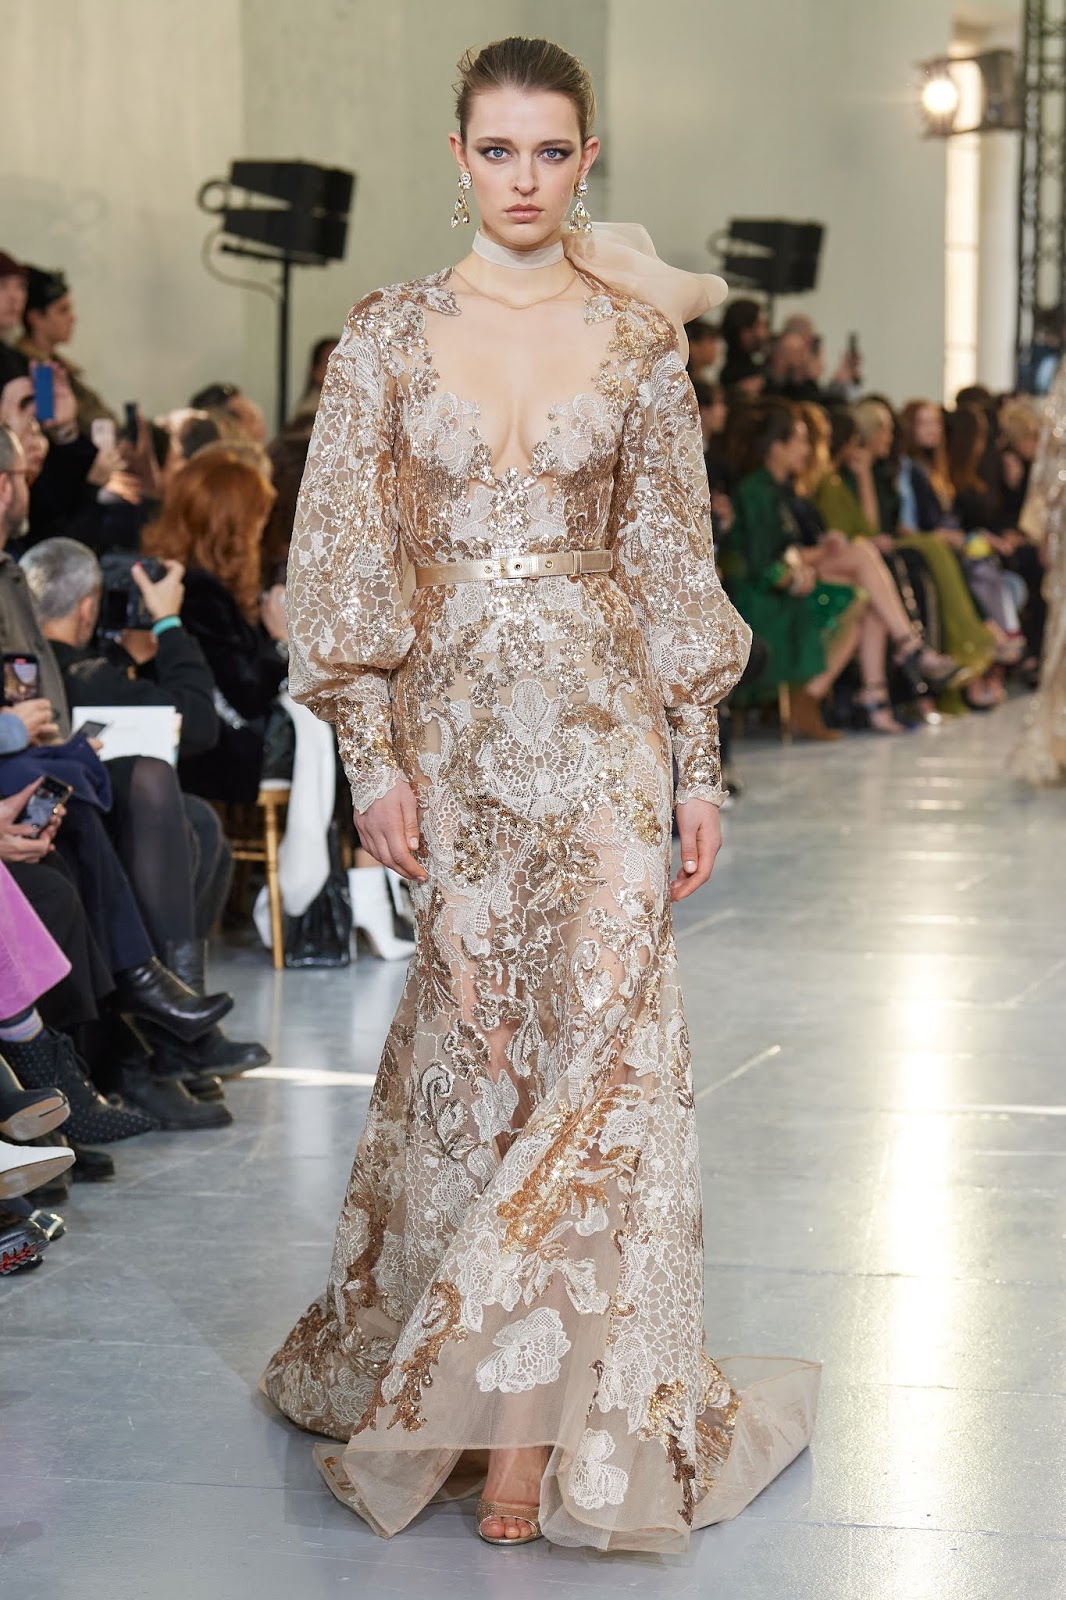 HAUTE COUTURE : ELIE SAAB April 11, 2020 | ZsaZsa Bellagio - Like No Other